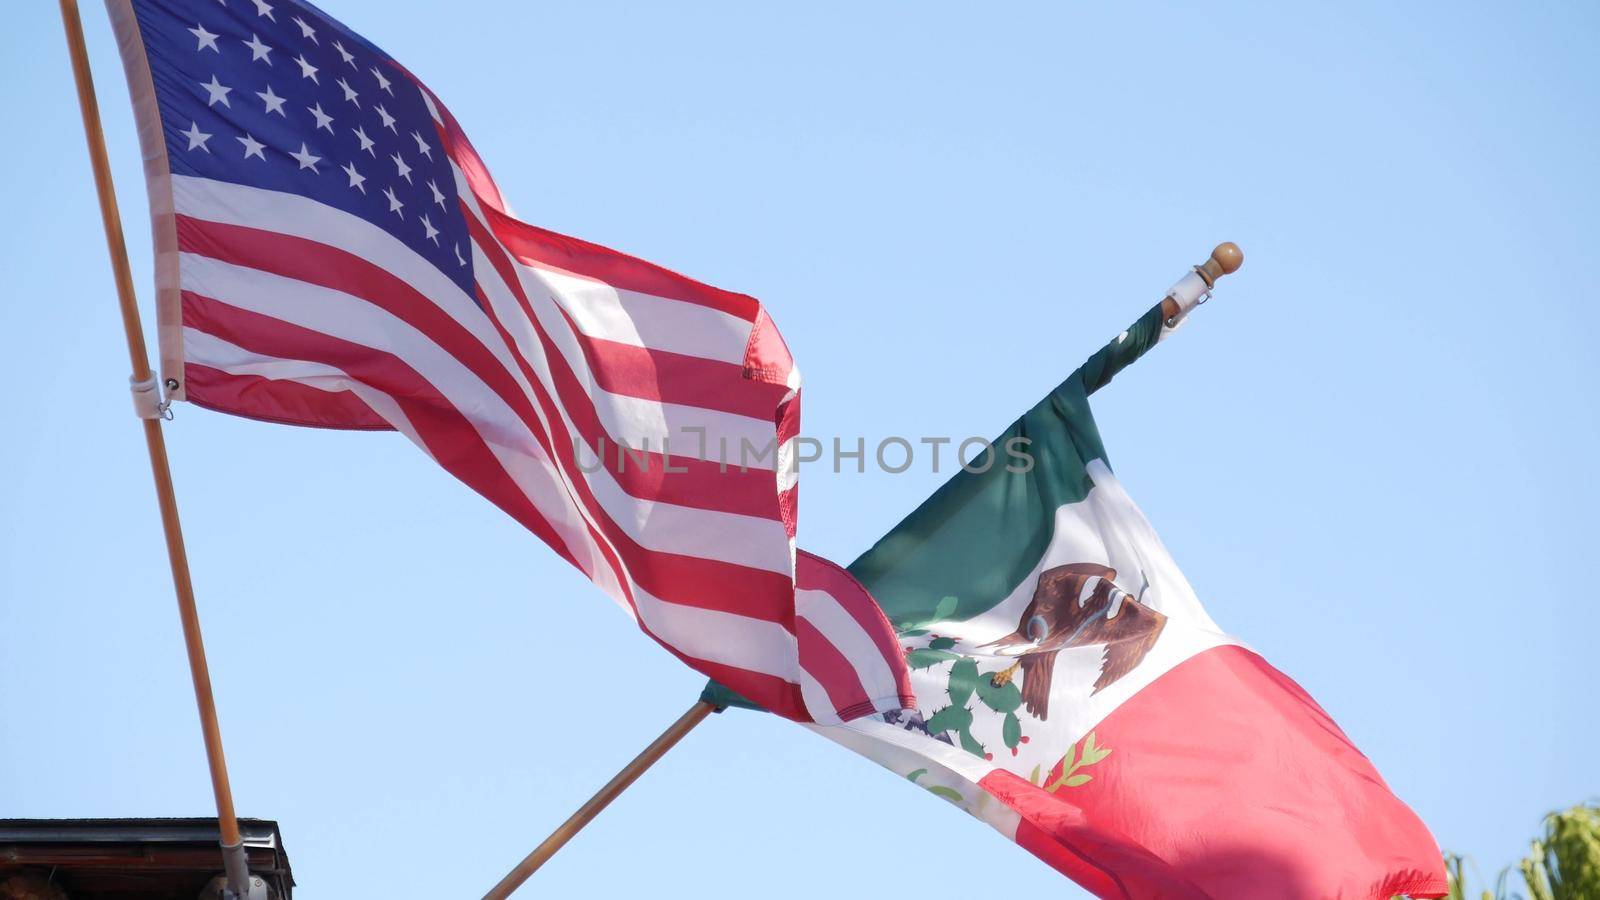 Mexican tricolor and American flag waving on wind. Two national icons of Mexico and United States against sky, San Diego, California, USA. Political symbol of border, relationship and togetherness by DogoraSun